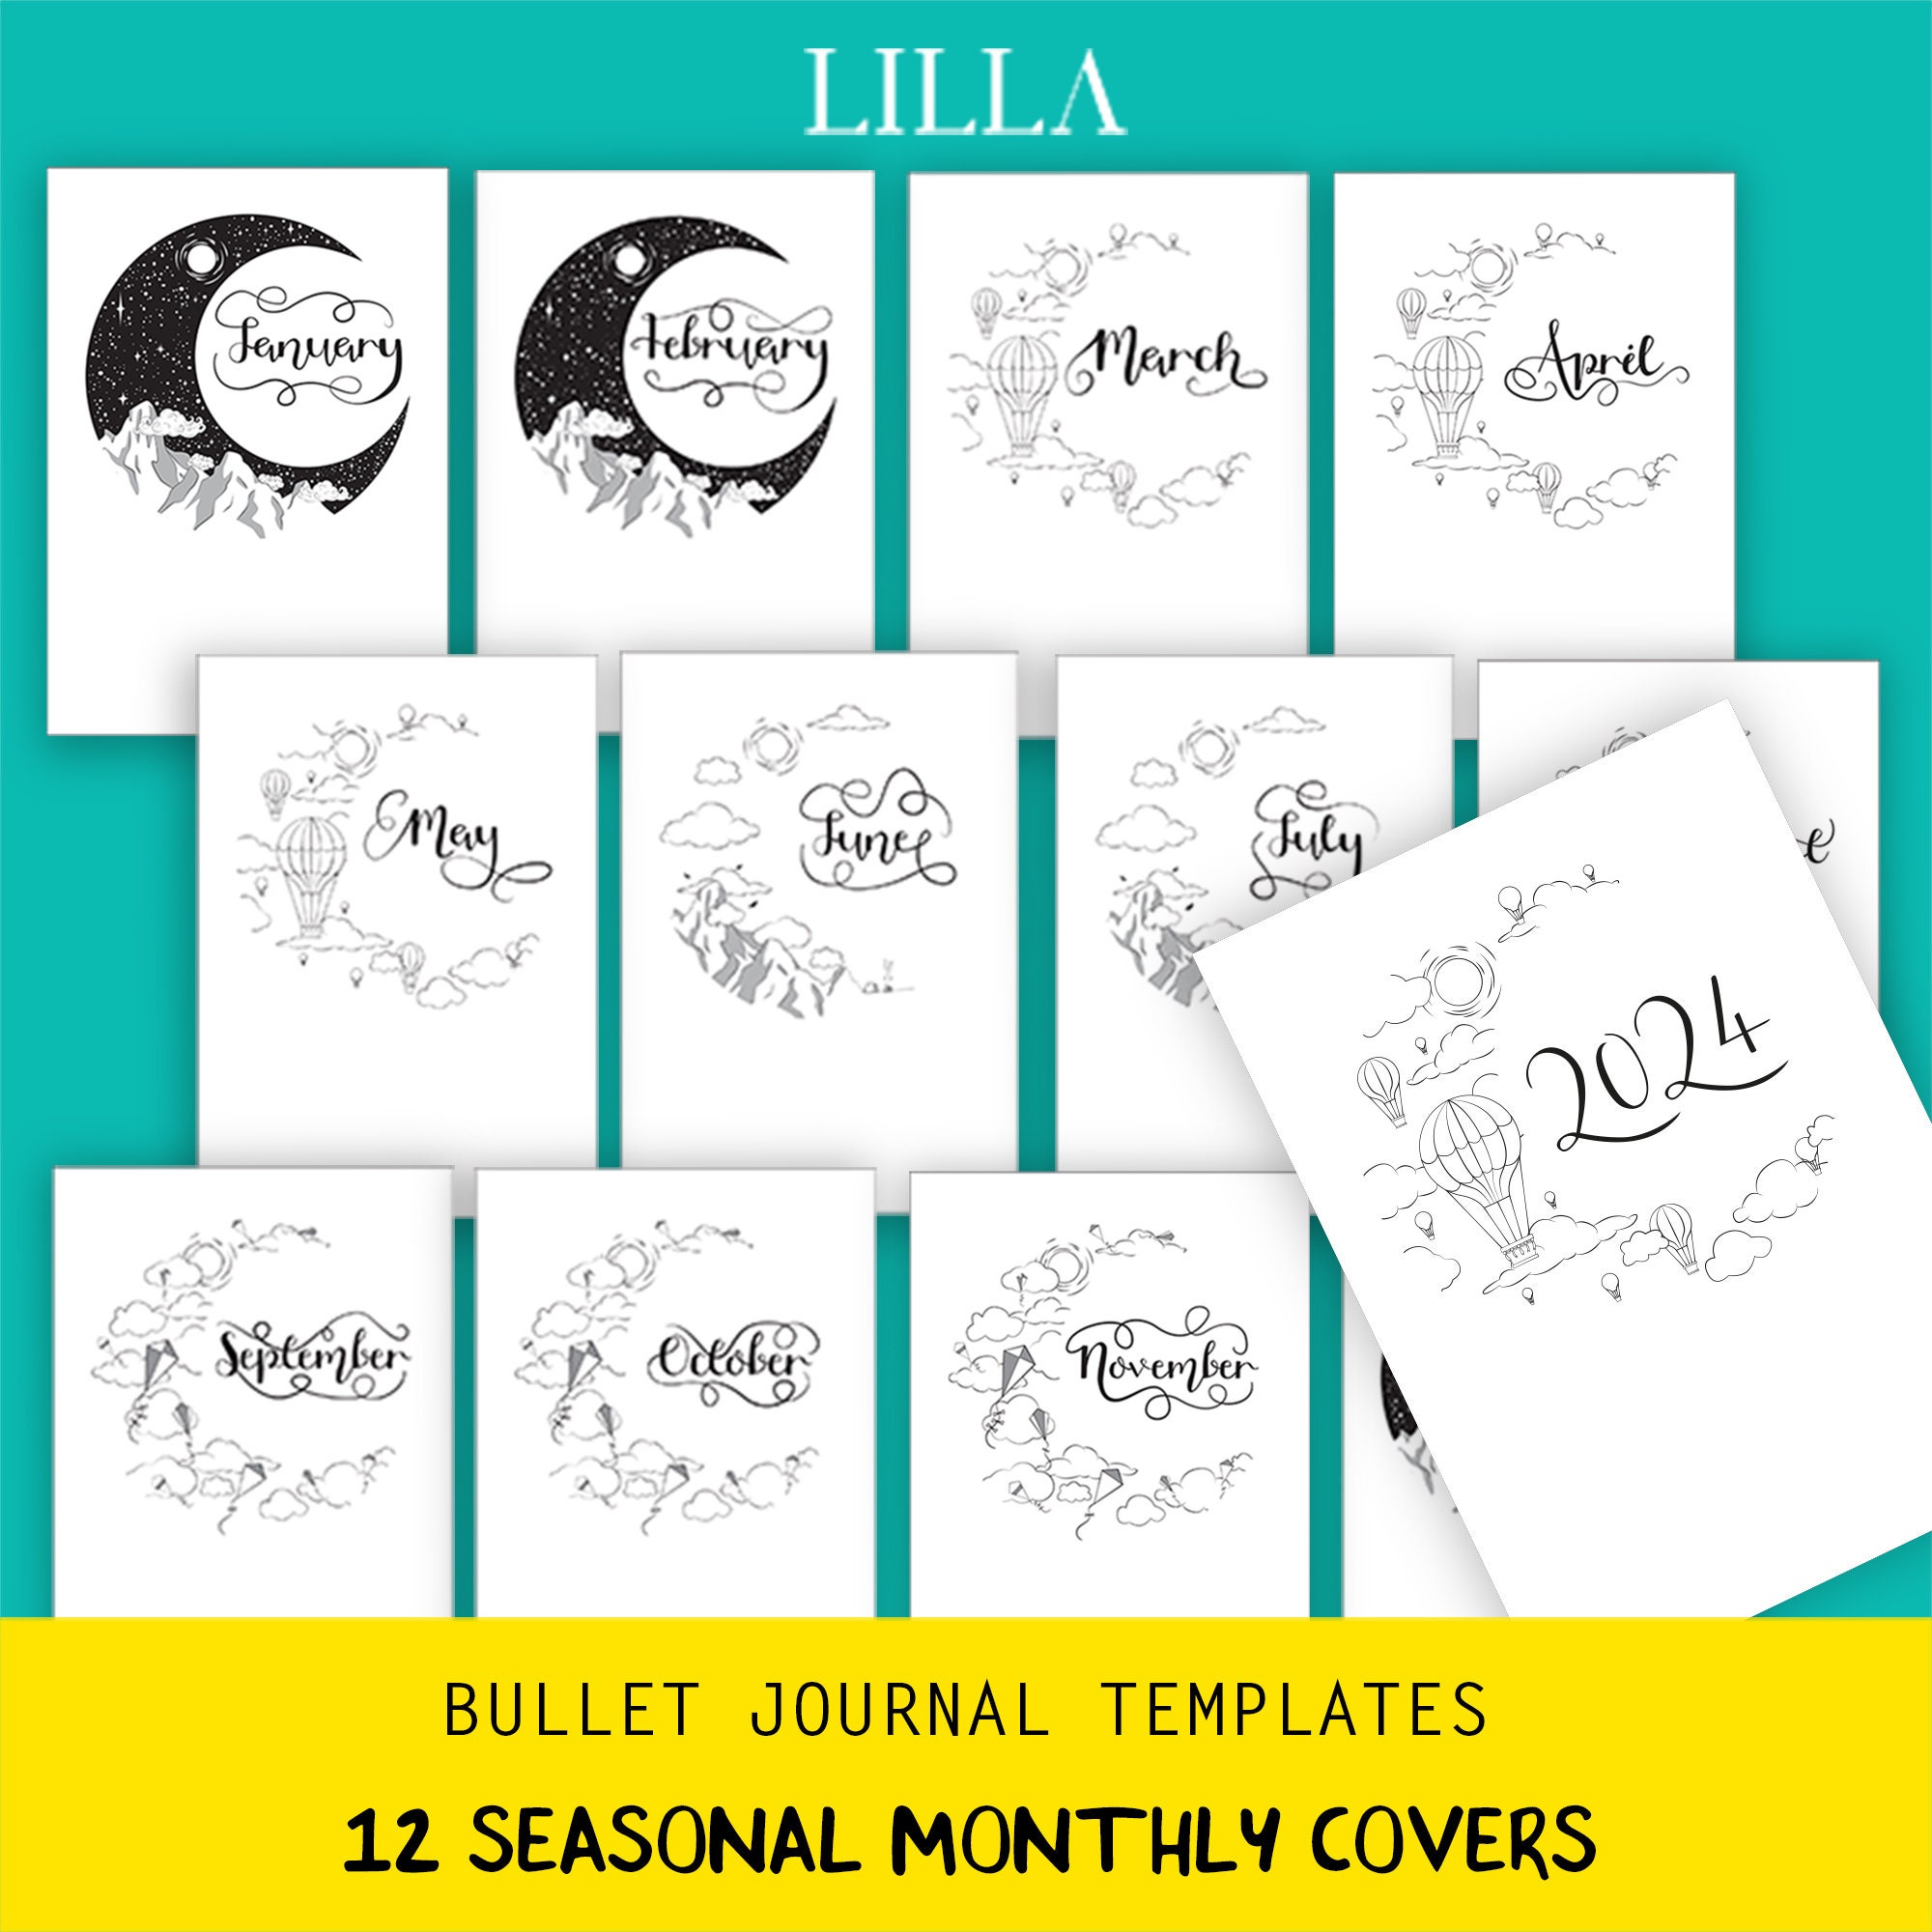 Monthly drawing prompts for Bullet Journaling - free printable